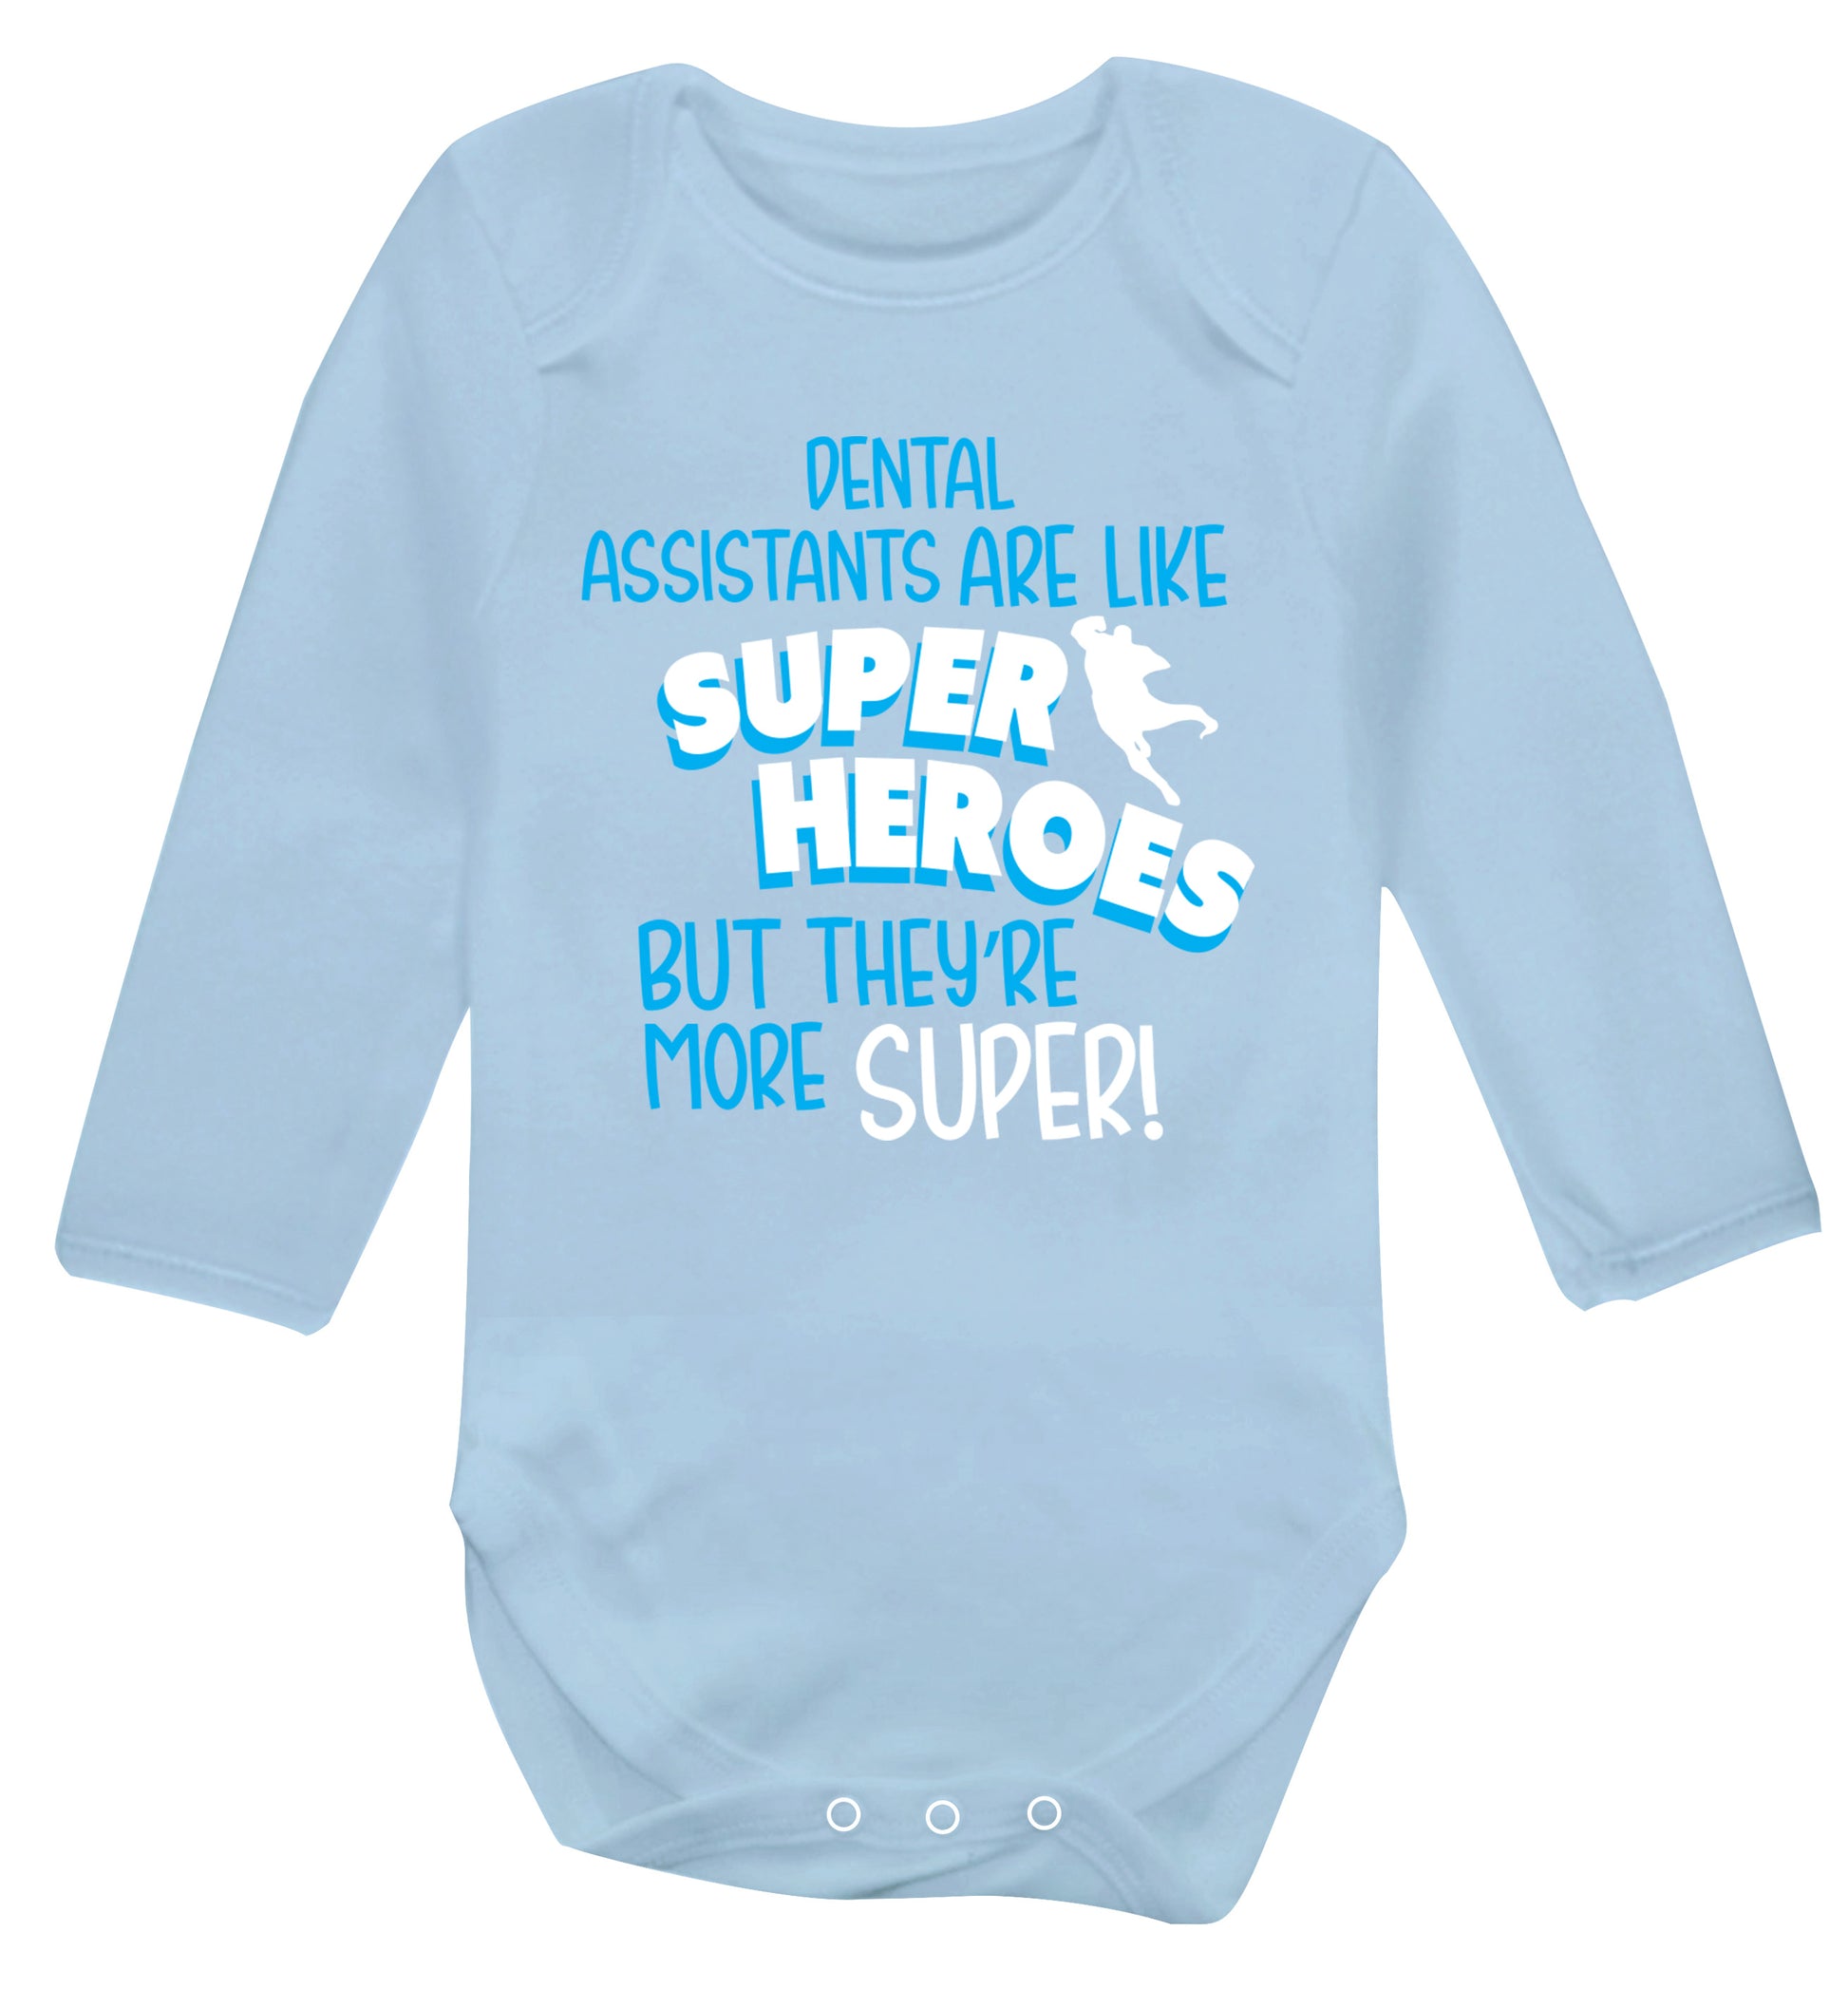 Dental Assistants are like superheros but they're more super Baby Vest long sleeved pale blue 6-12 months